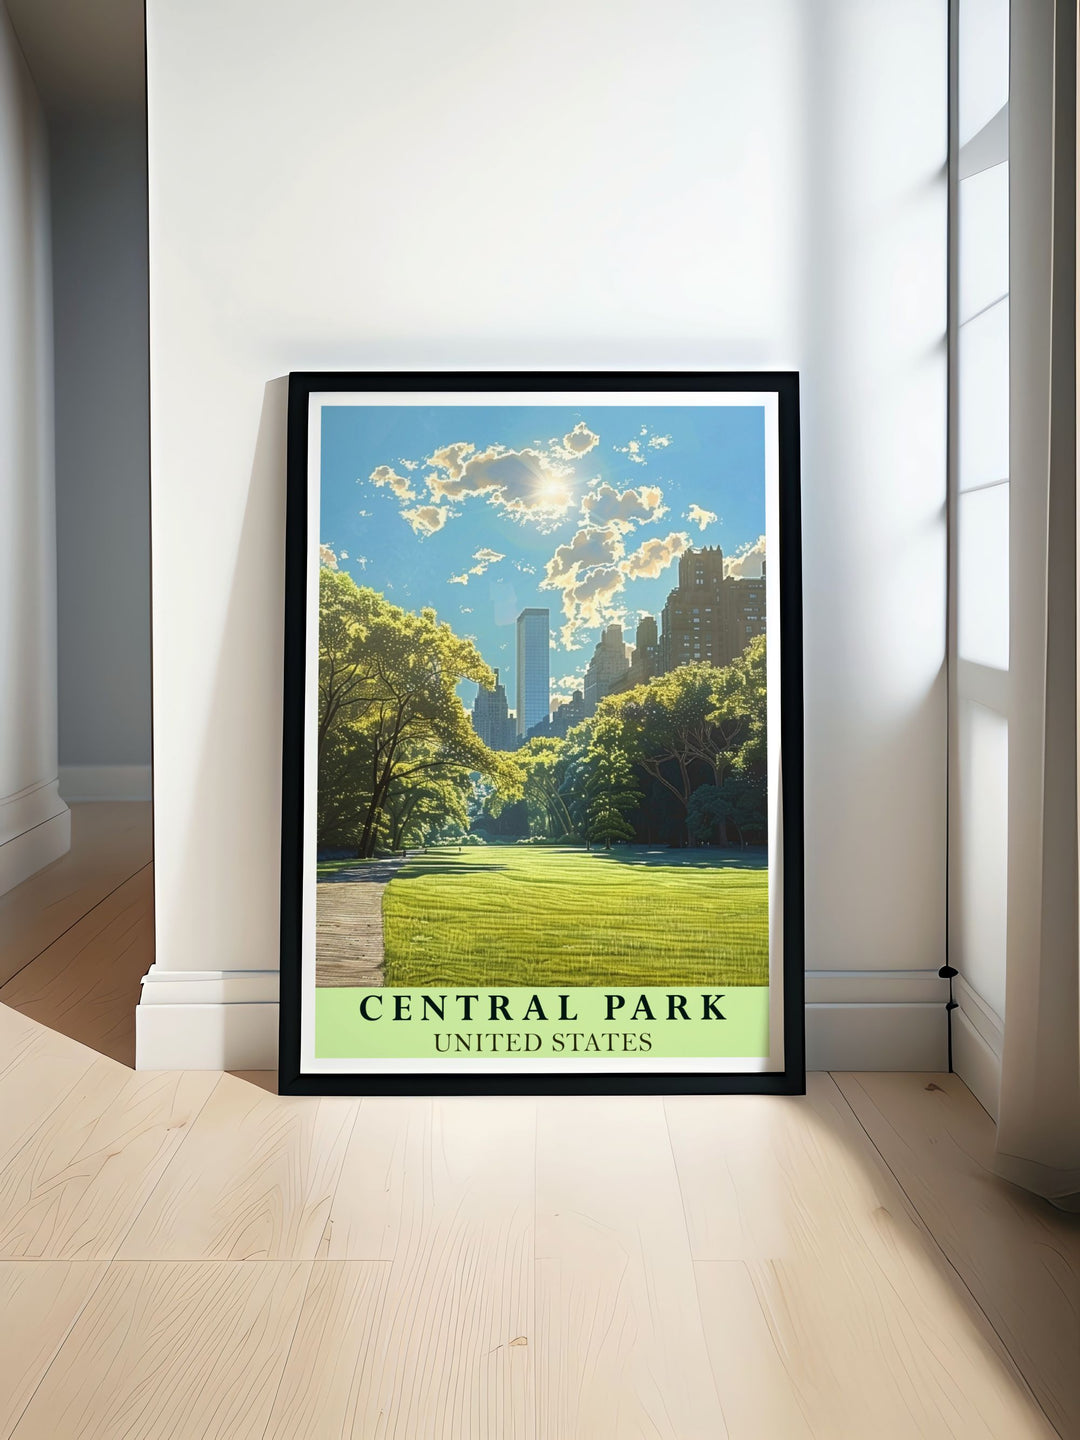 Illustrated with care, this travel poster brings to life the scenic beauty of Central Parks Lawn and the historical allure of Central Park, ideal for enhancing any room with New York Citys vibrant and diverse landscapes.